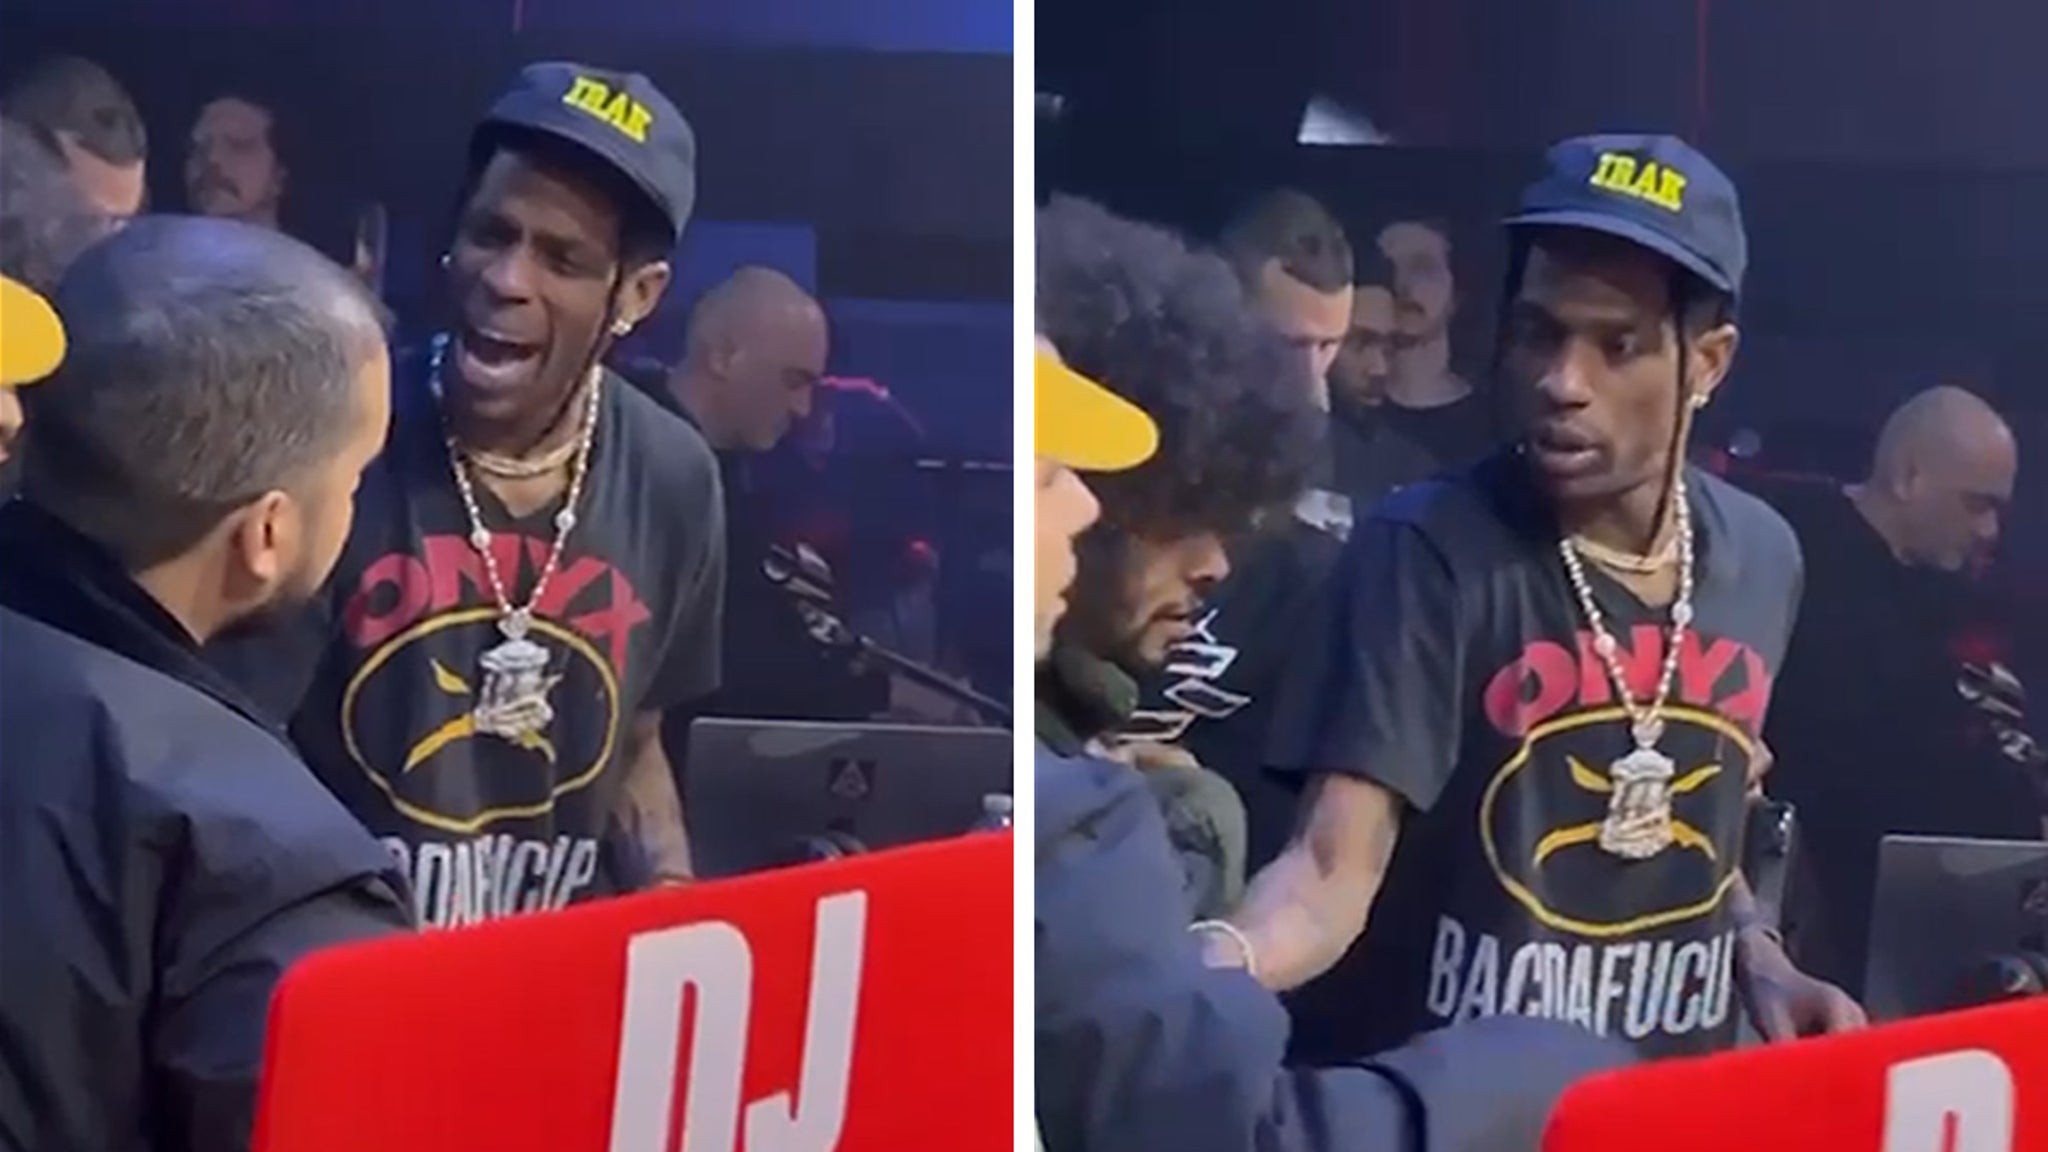 Travis Scott Pissed Off in DJ Booth Before Alleged Assault, New Video Shows